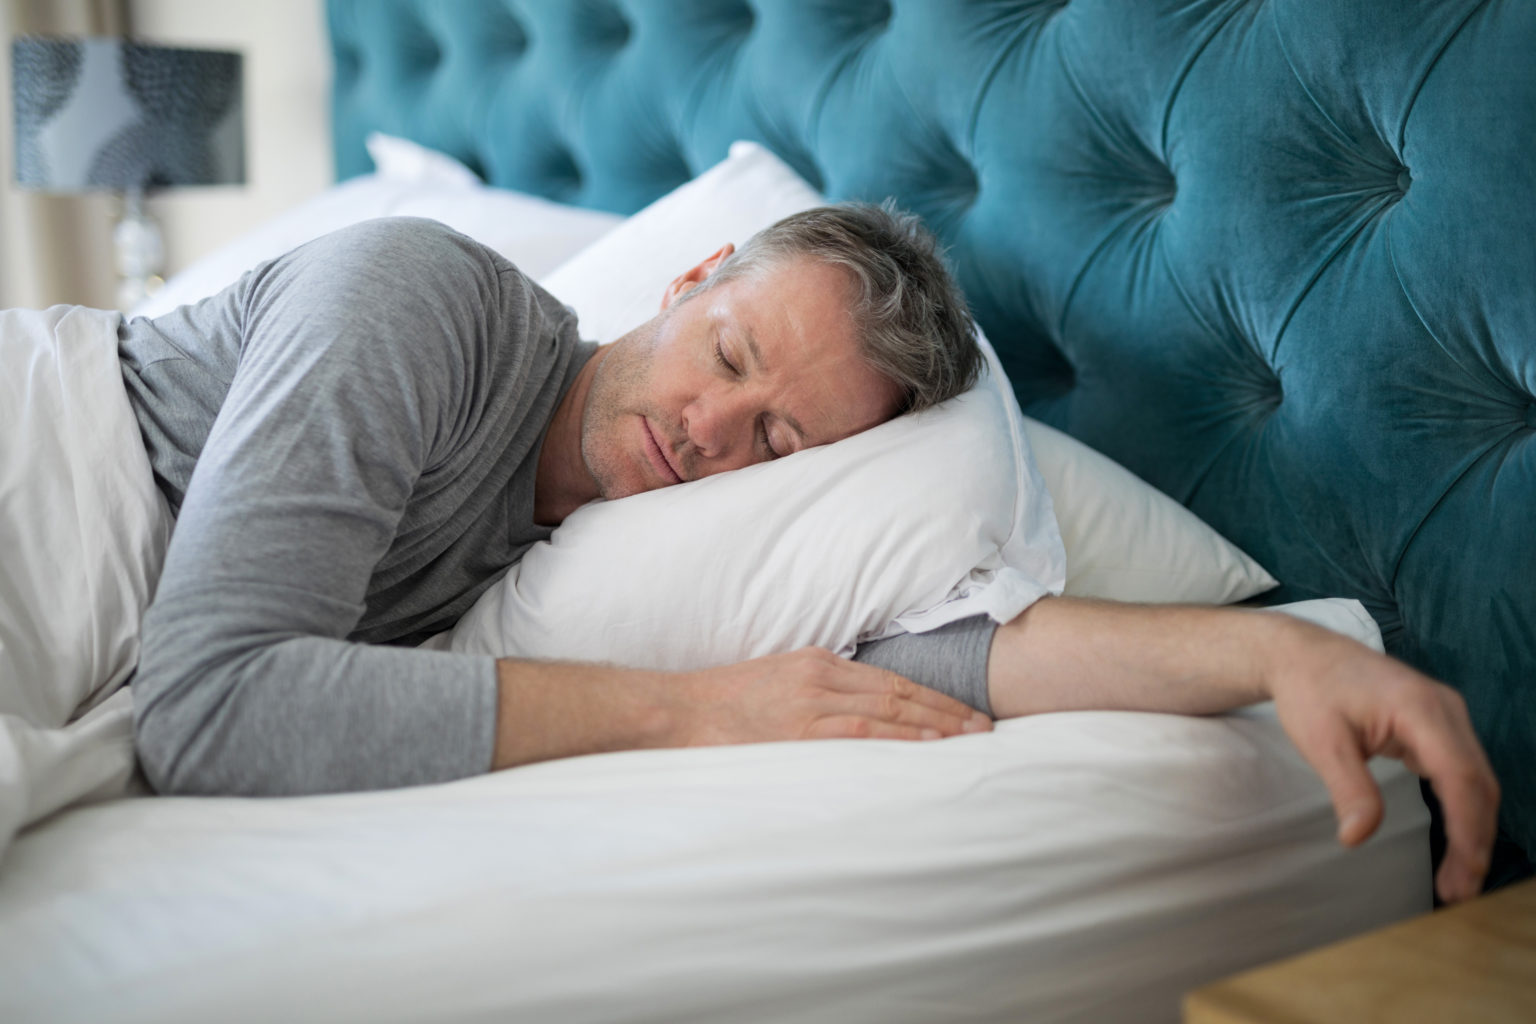 Five Simple Tips to Getting A Better Night’s Sleep